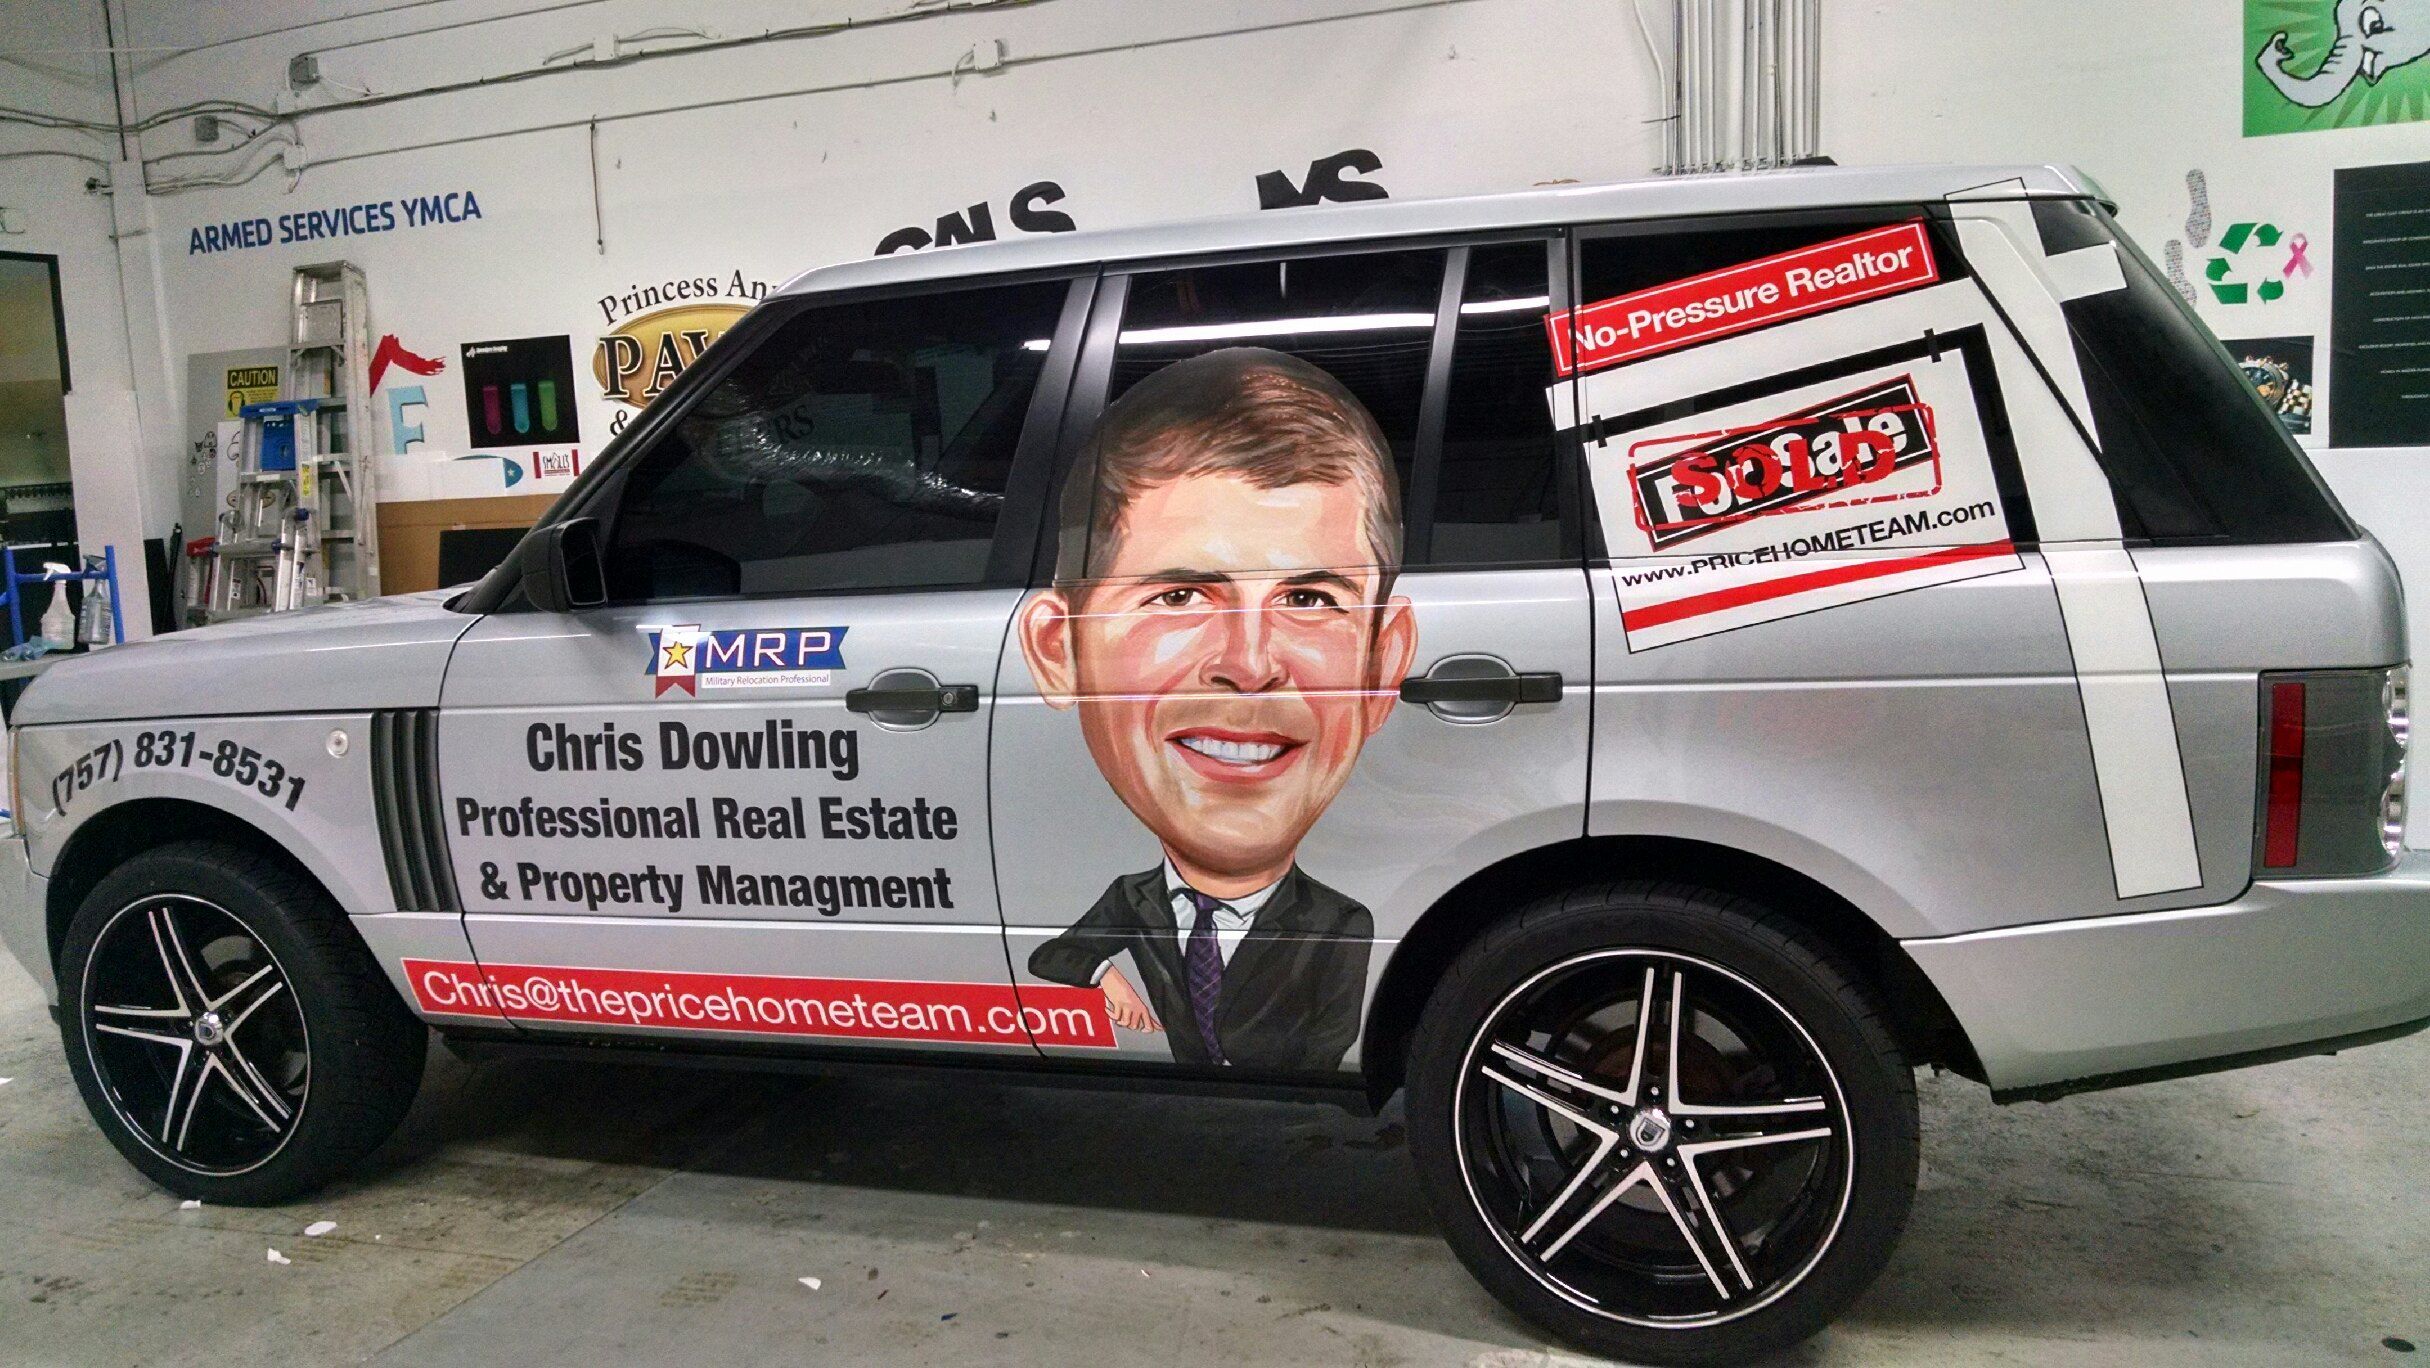 wrap a car with your real estate branding